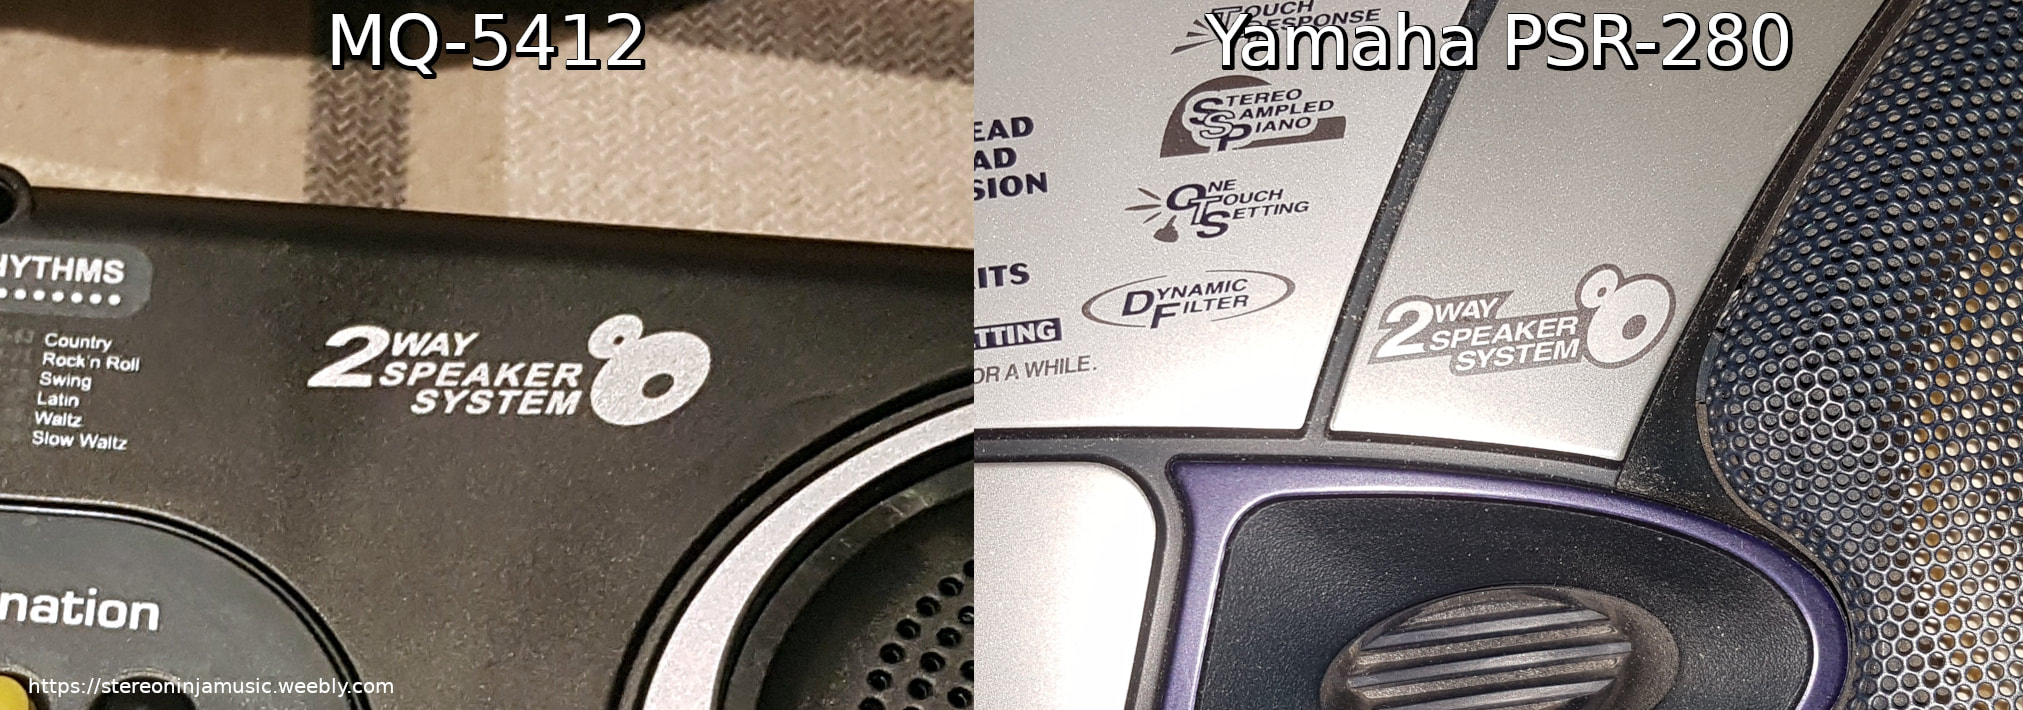 An image comparing the 2 way speaker system logo on the MQ-5412 and Yamaha PSR-280 keyboard